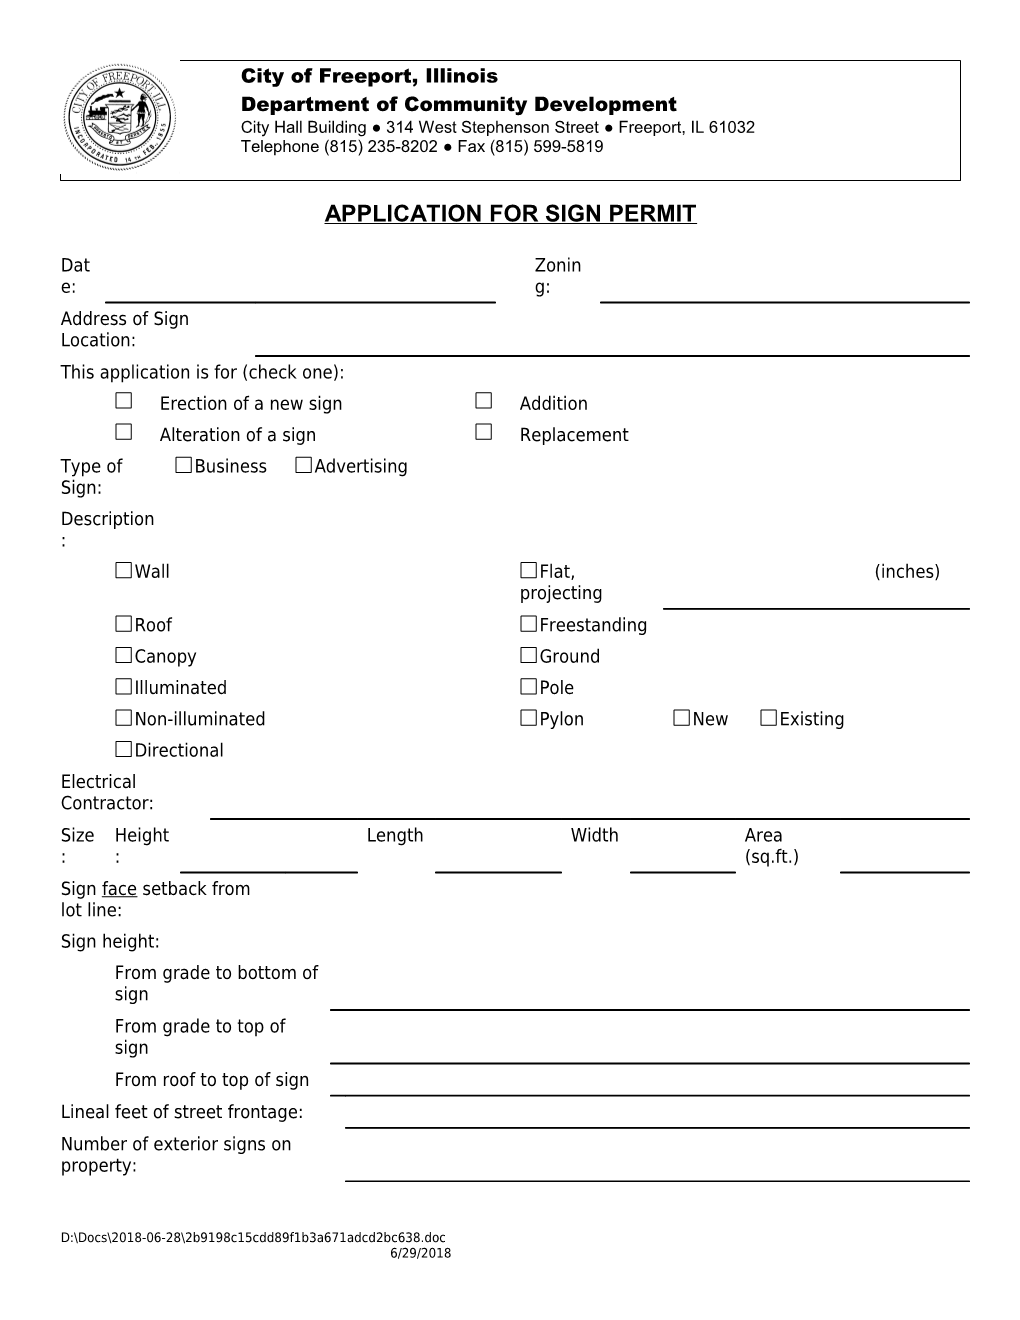 Application for Sign Permit